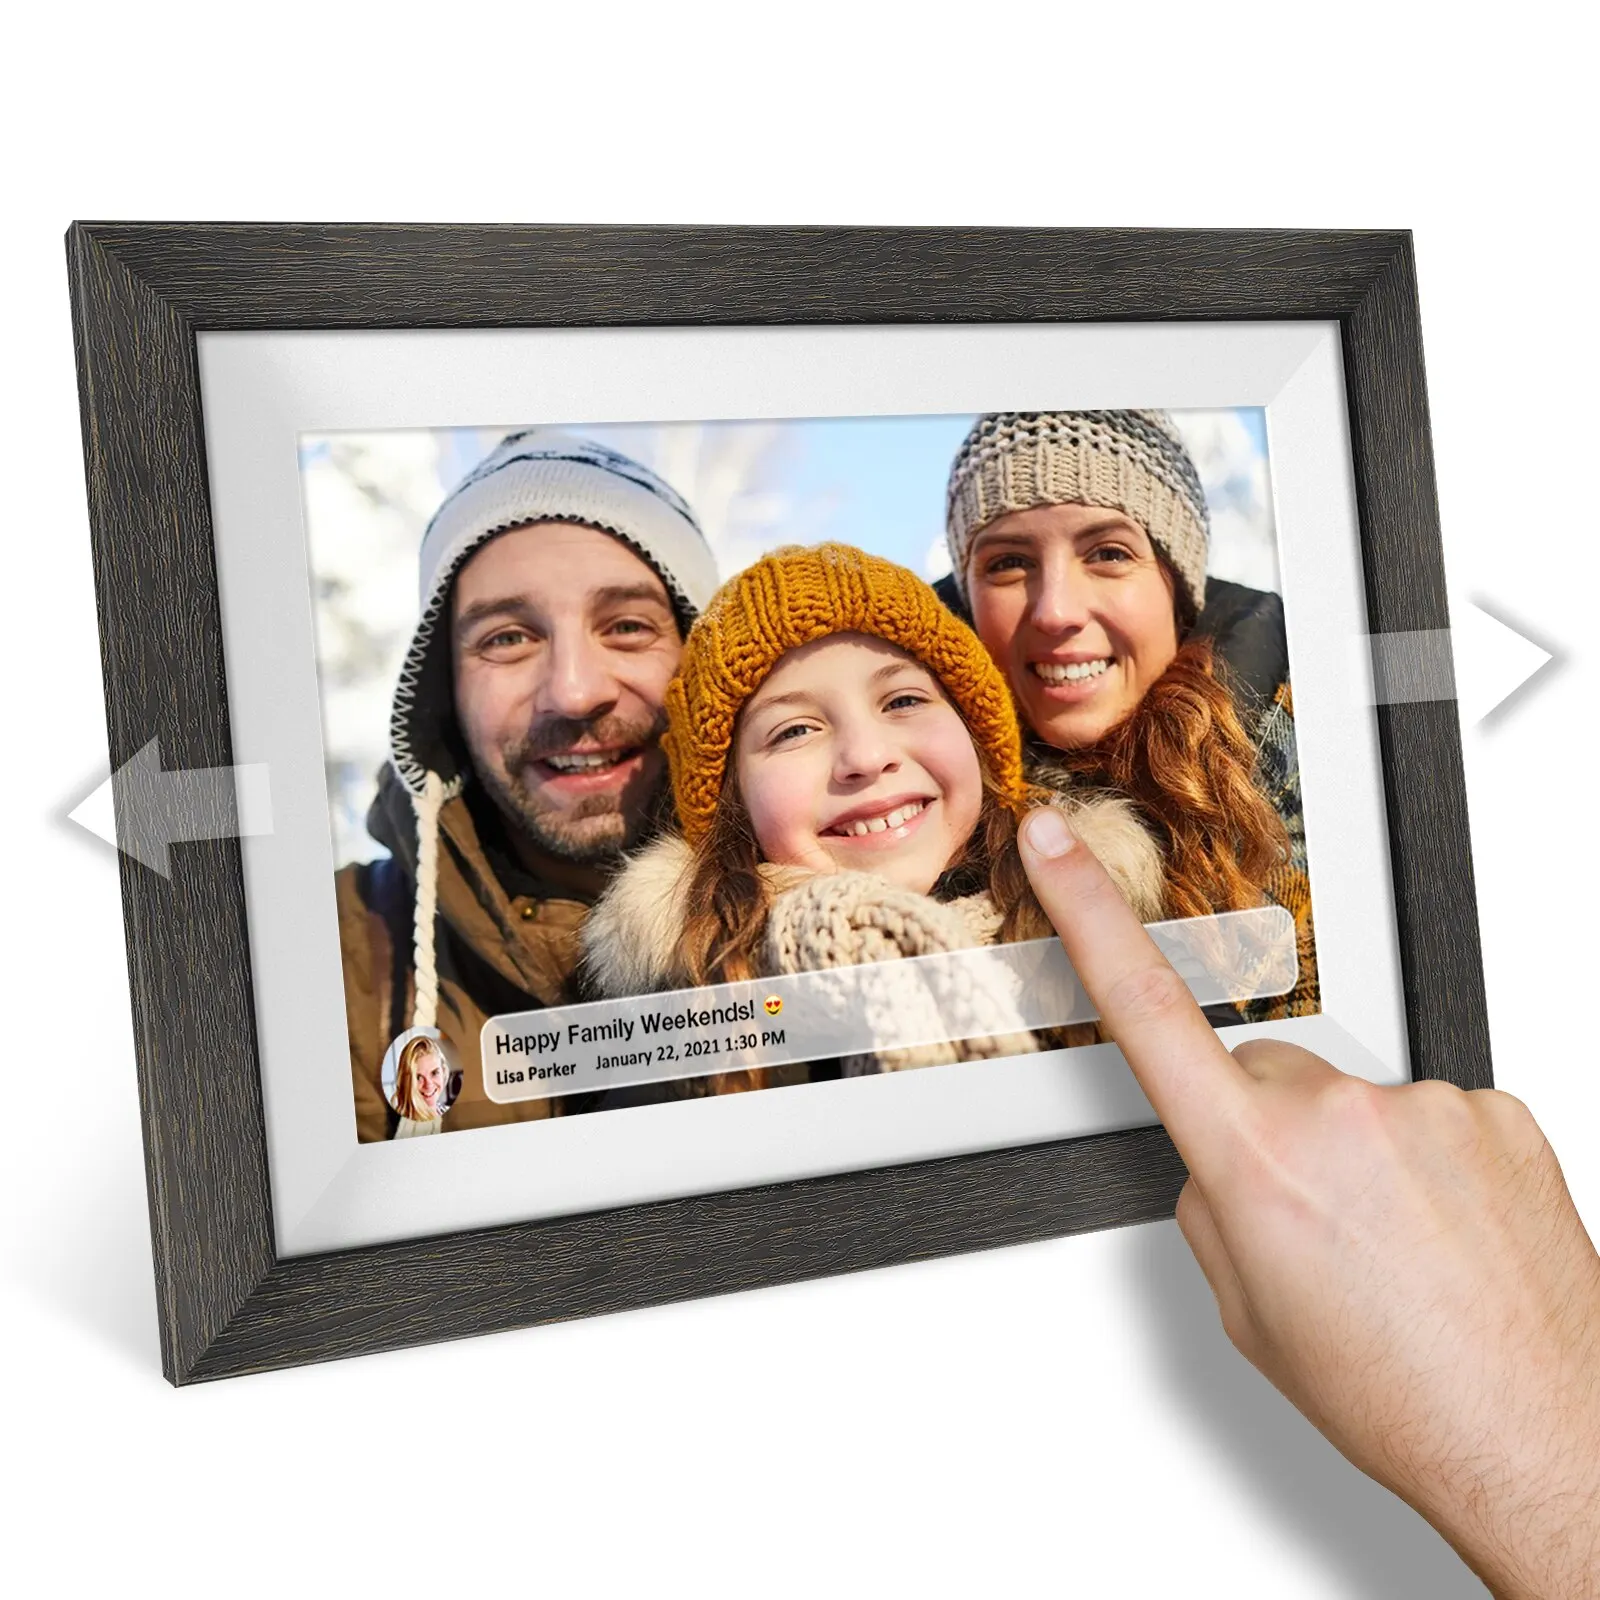 Frameo 32GB Memory 10.1 Inch Smart Digital Picture Frame Wood WiFi IPS HD 1080P Electronic Digital Photo Frame Touch Screen images - 6